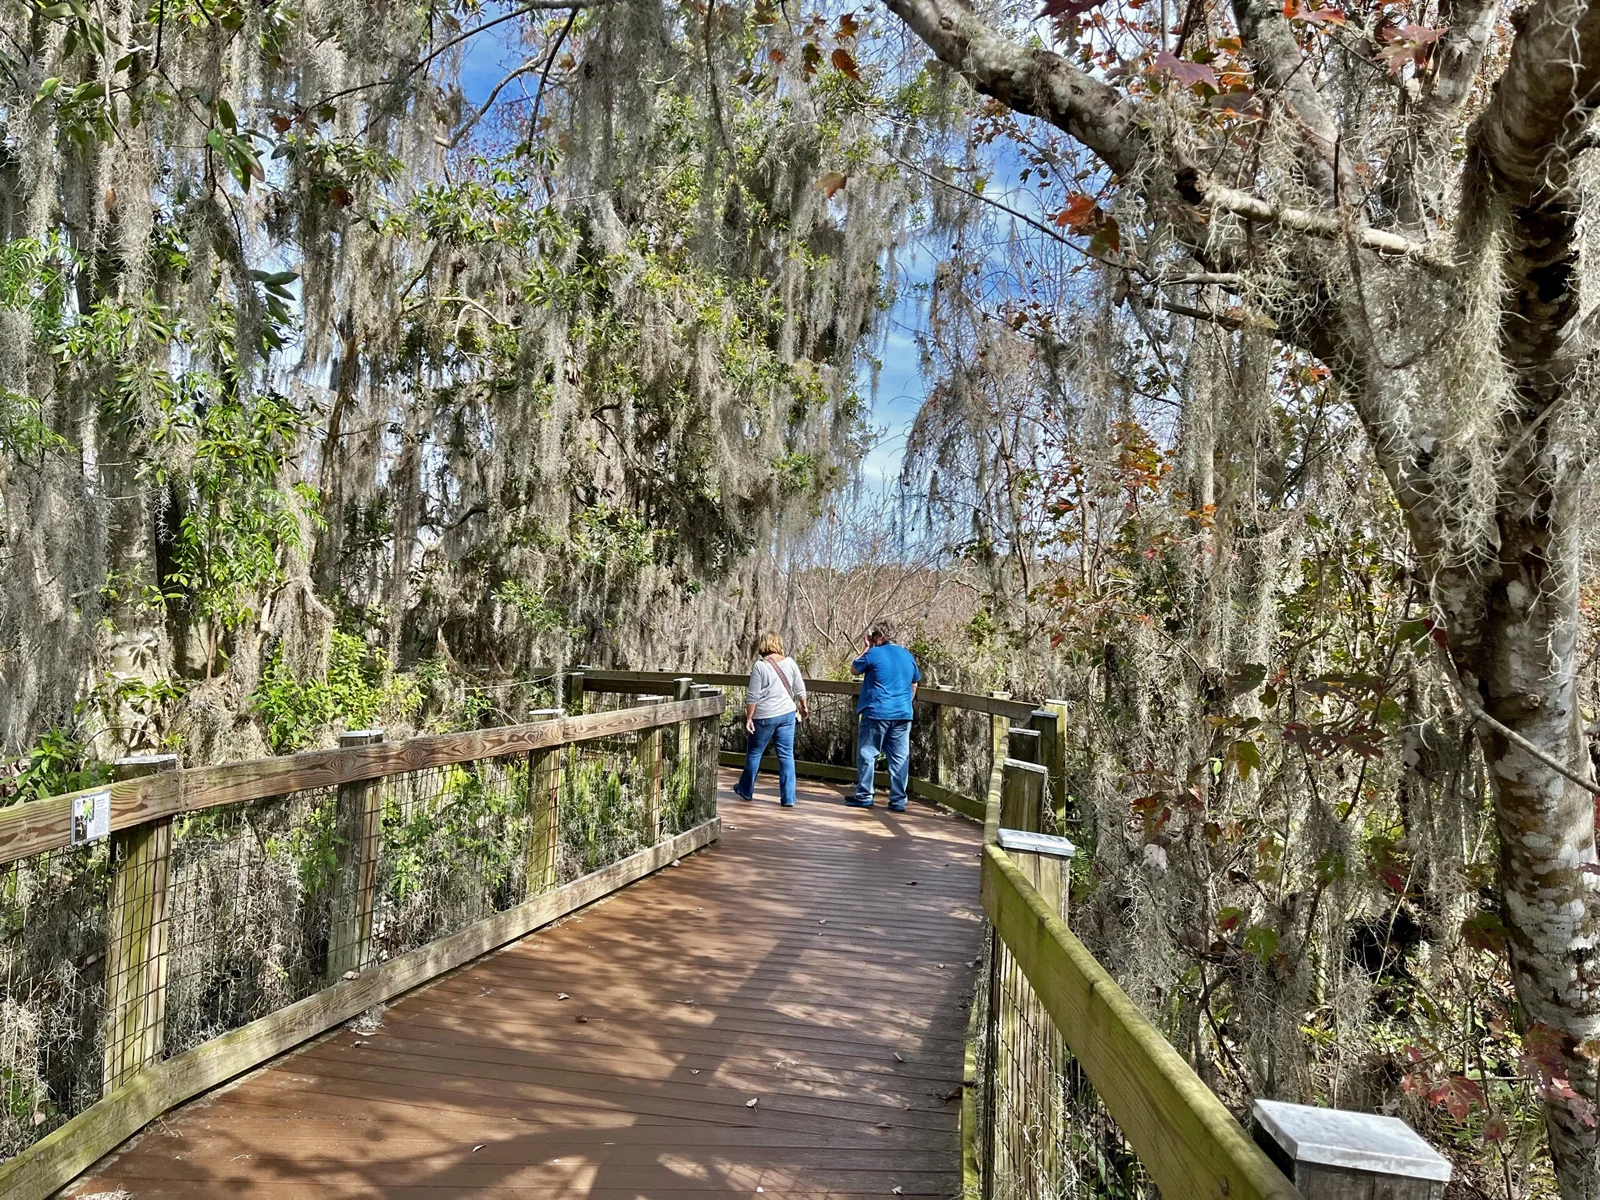 Visitors stroll on the boardwalk at the Oakland Nature Preserve. (Photo: Bonnie Gross)